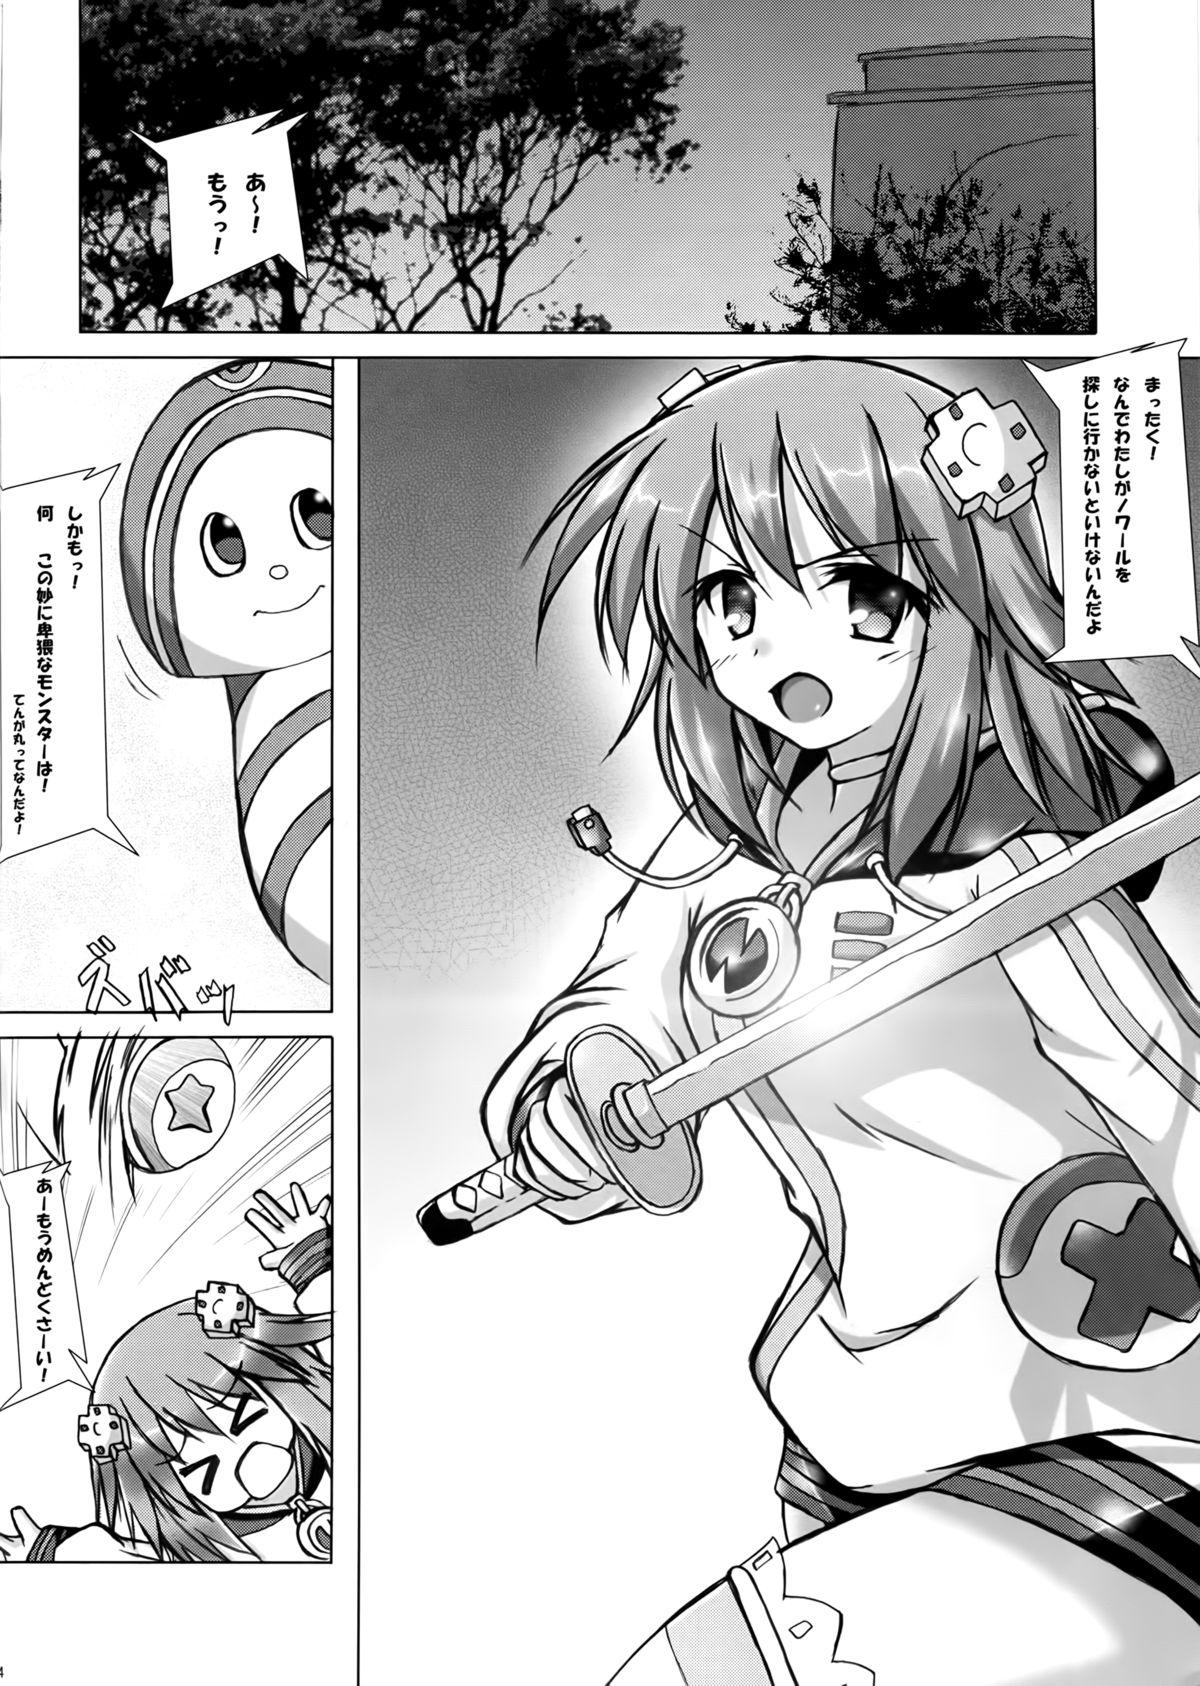 Dick Suck Tentacle Syndrome - Hyperdimension neptunia Sucking Cock - Page 4